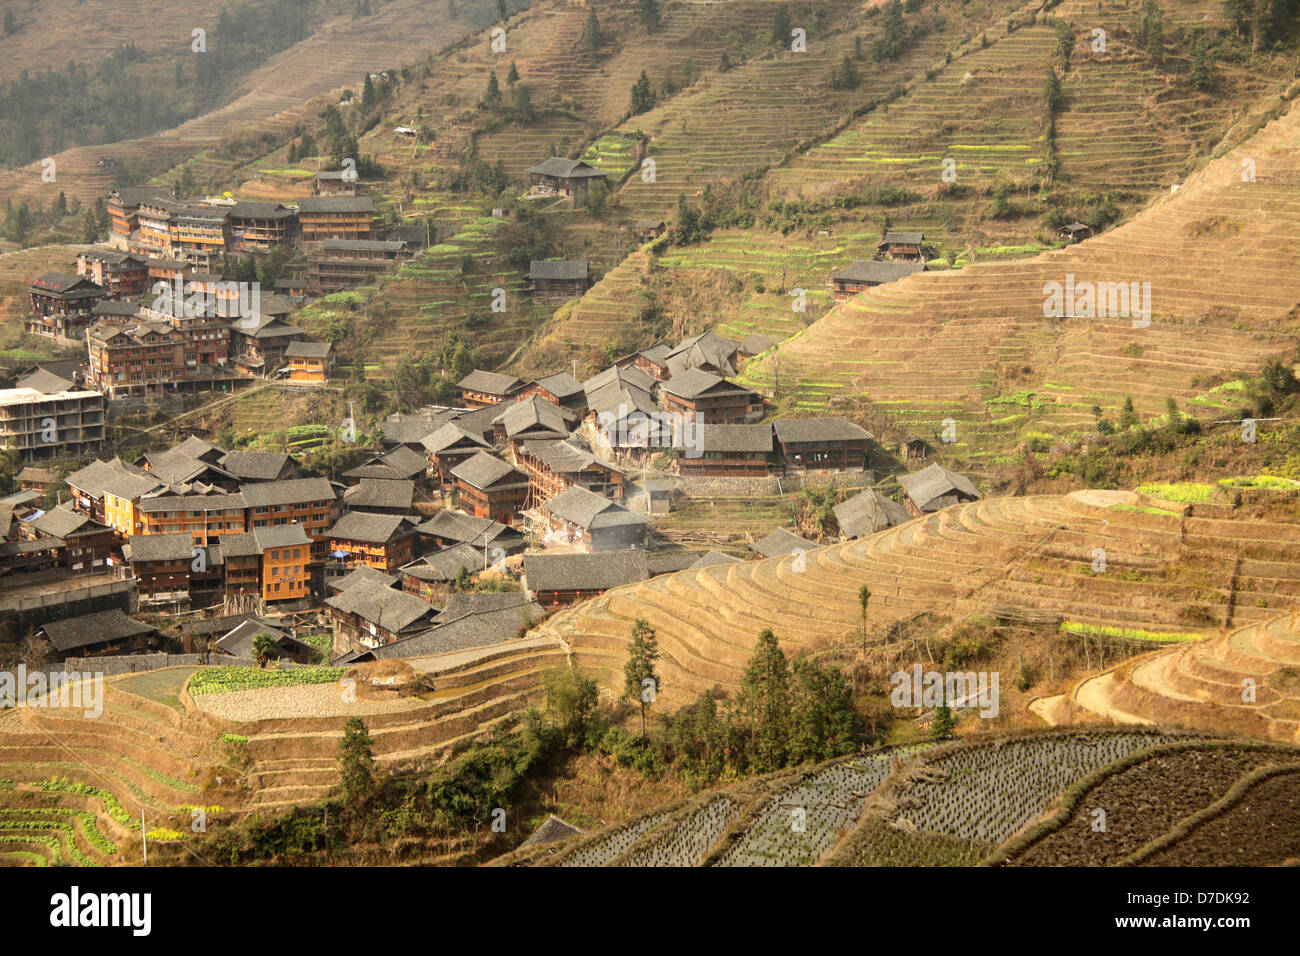 The world-famous rice terraces of Longji 'backbone of the dragon' or 'vertebra of the dragon' and the village of Ping An near th Stock Photo